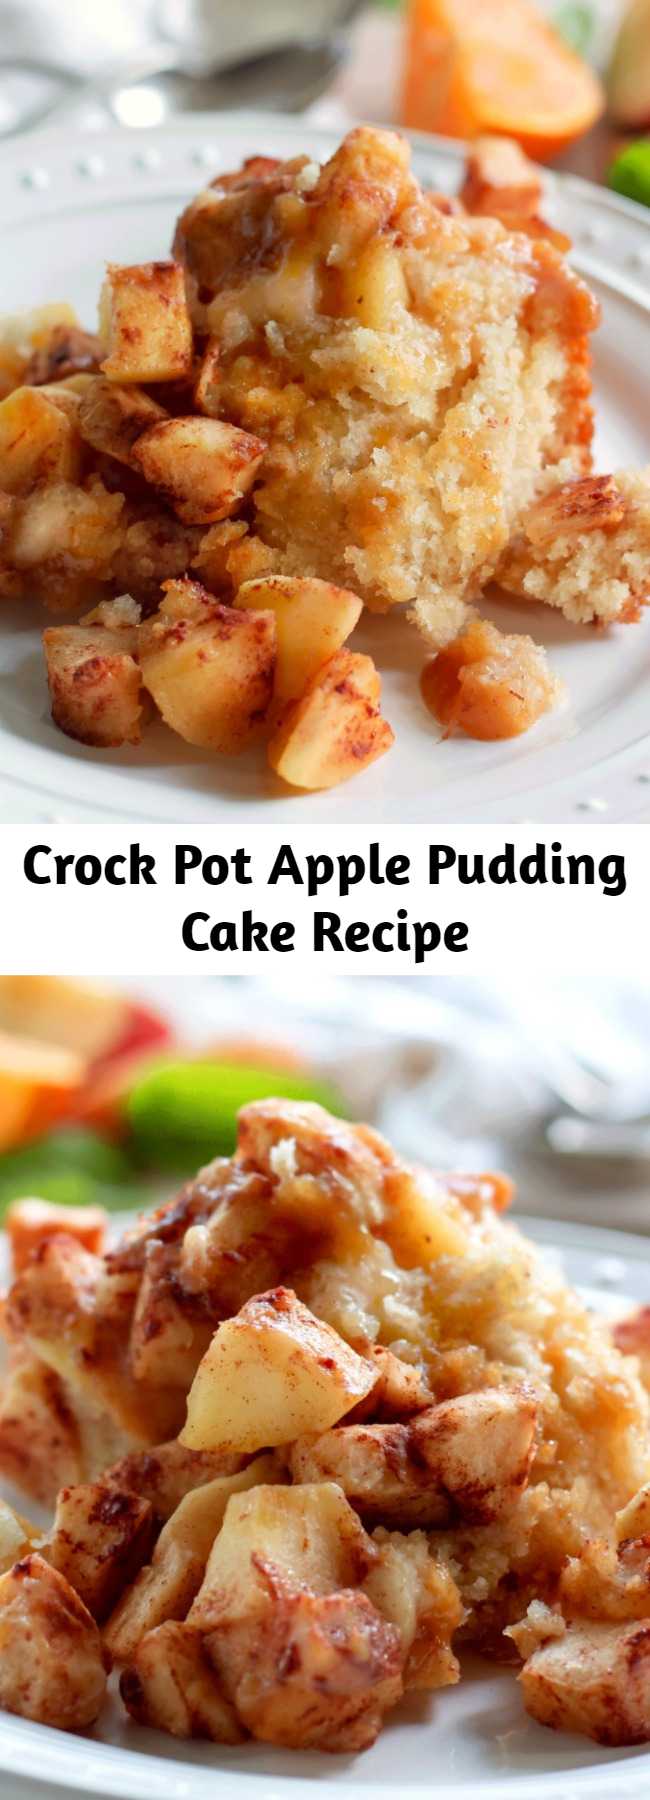 Crock Pot Apple Pudding Cake Recipe - Warm apples topped with cinnamon, a fluffy cake with a thick pudding flavored with orange. The batter for the cake goes on the bottom of the crock pot and actually rises up to make a soft, fluffy cake.  The pudding portion appears when you scoop out the cake and apples.